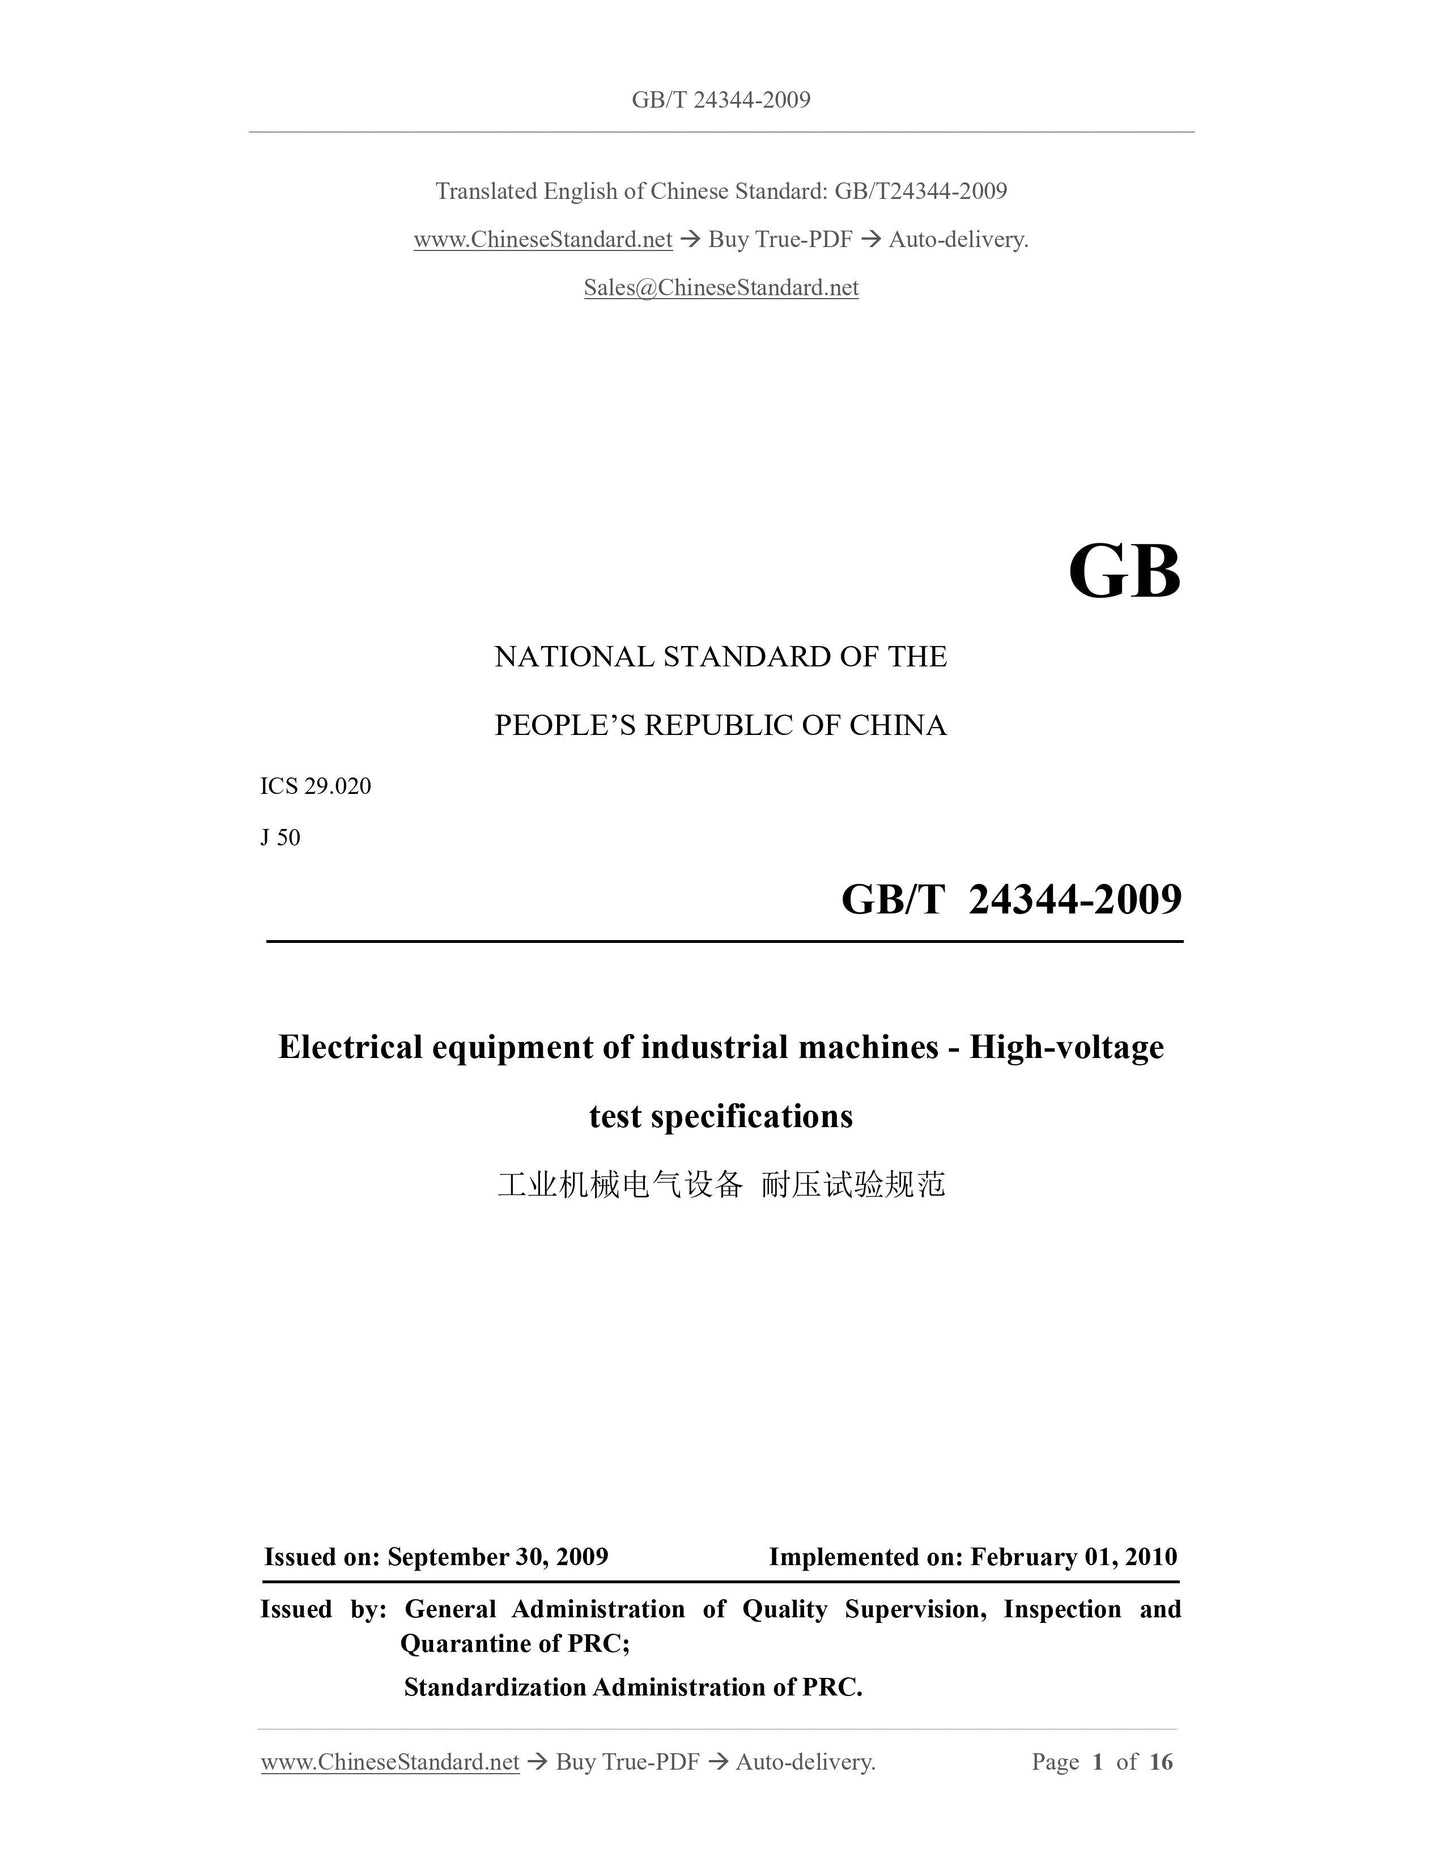 GB/T 24344-2009 Page 1